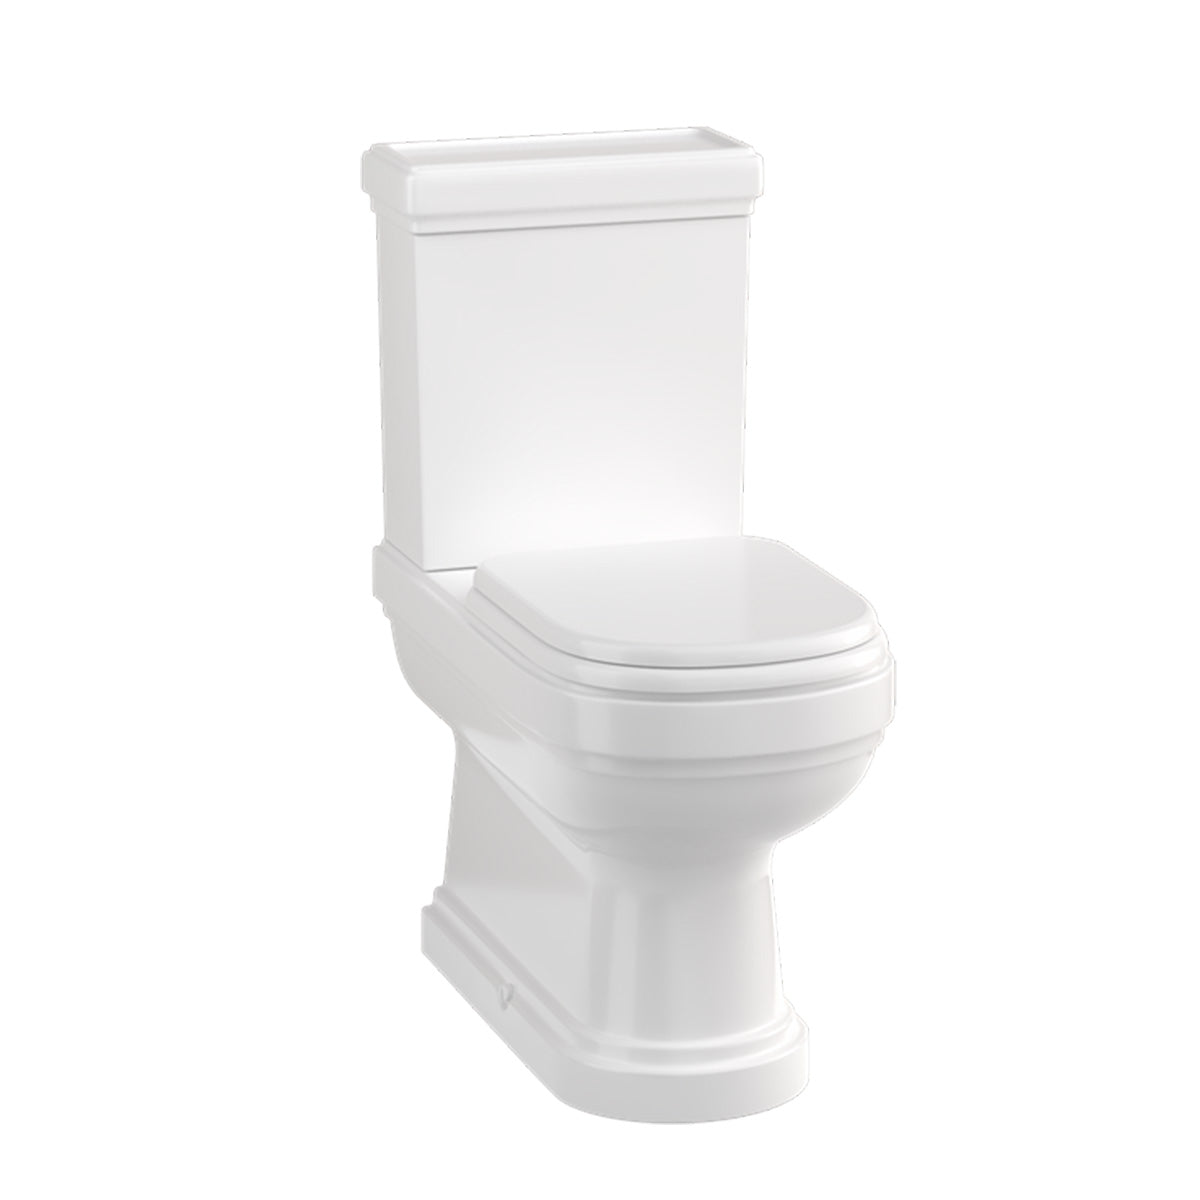 burlington riviera close coupled full back to wall wc toilet Deluxe Bathrooms UK